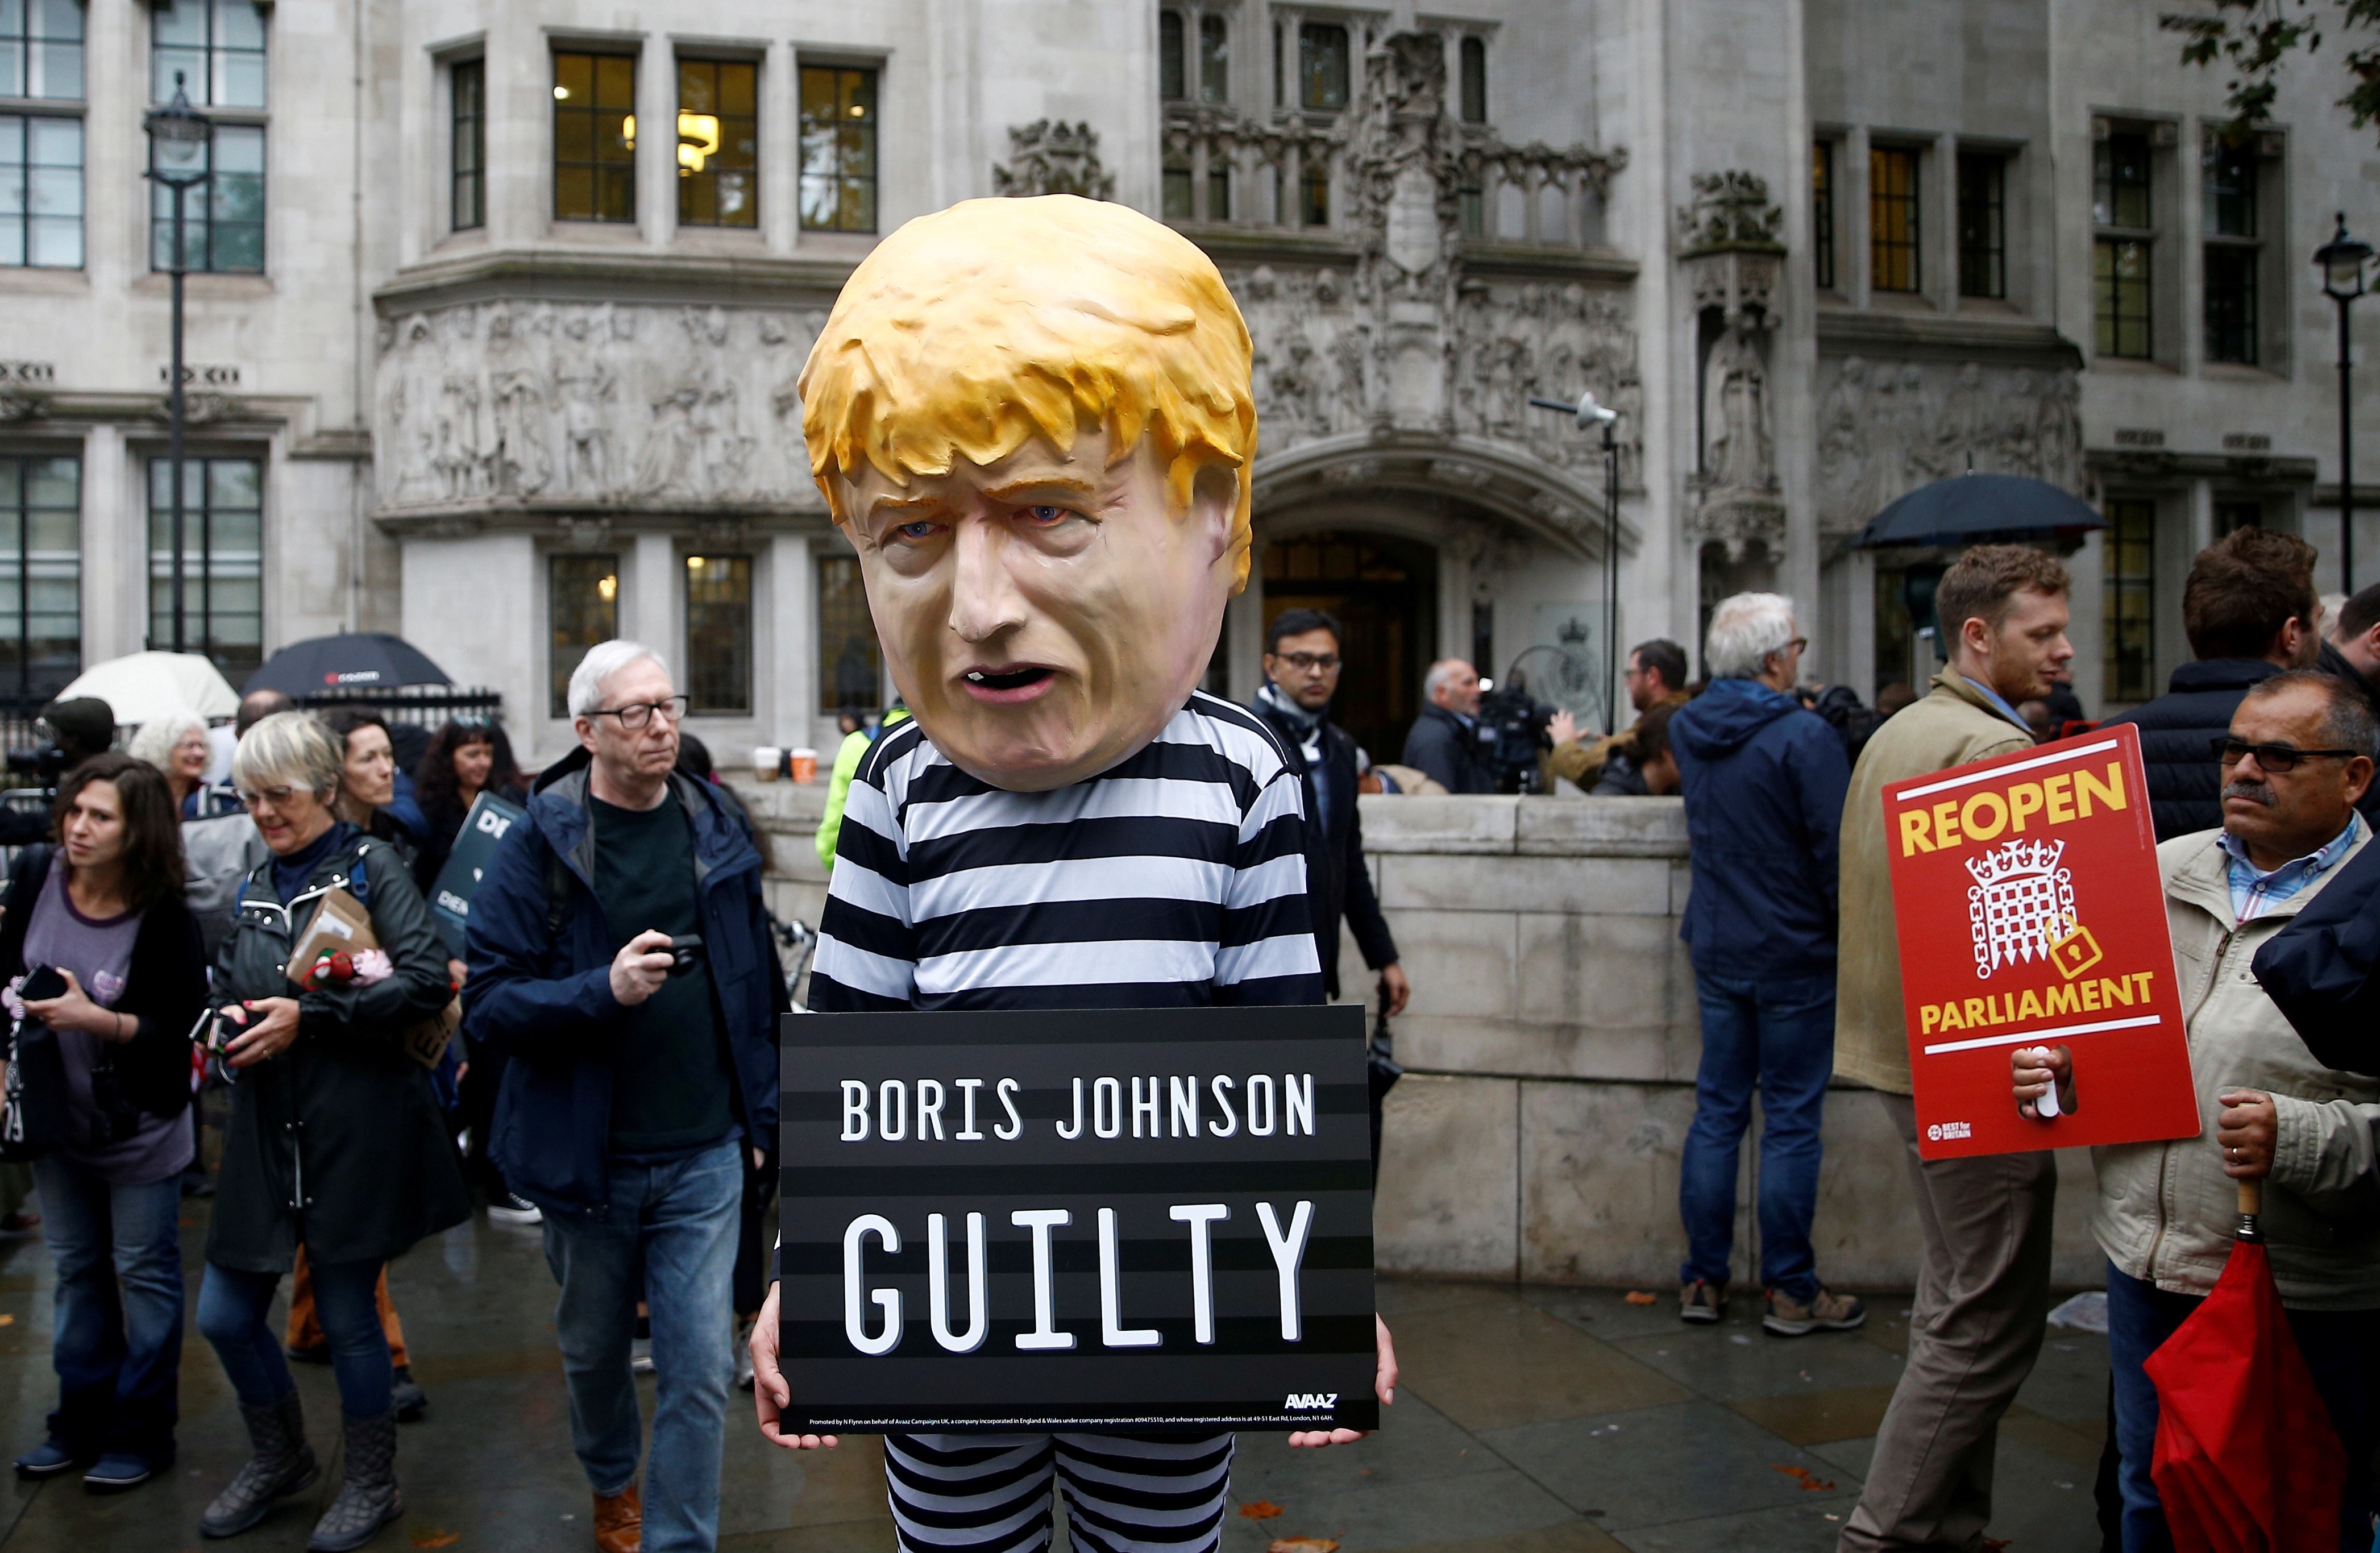   A protester stands outside the Supreme Court of the United Kingdom on 24 September (Reuters)